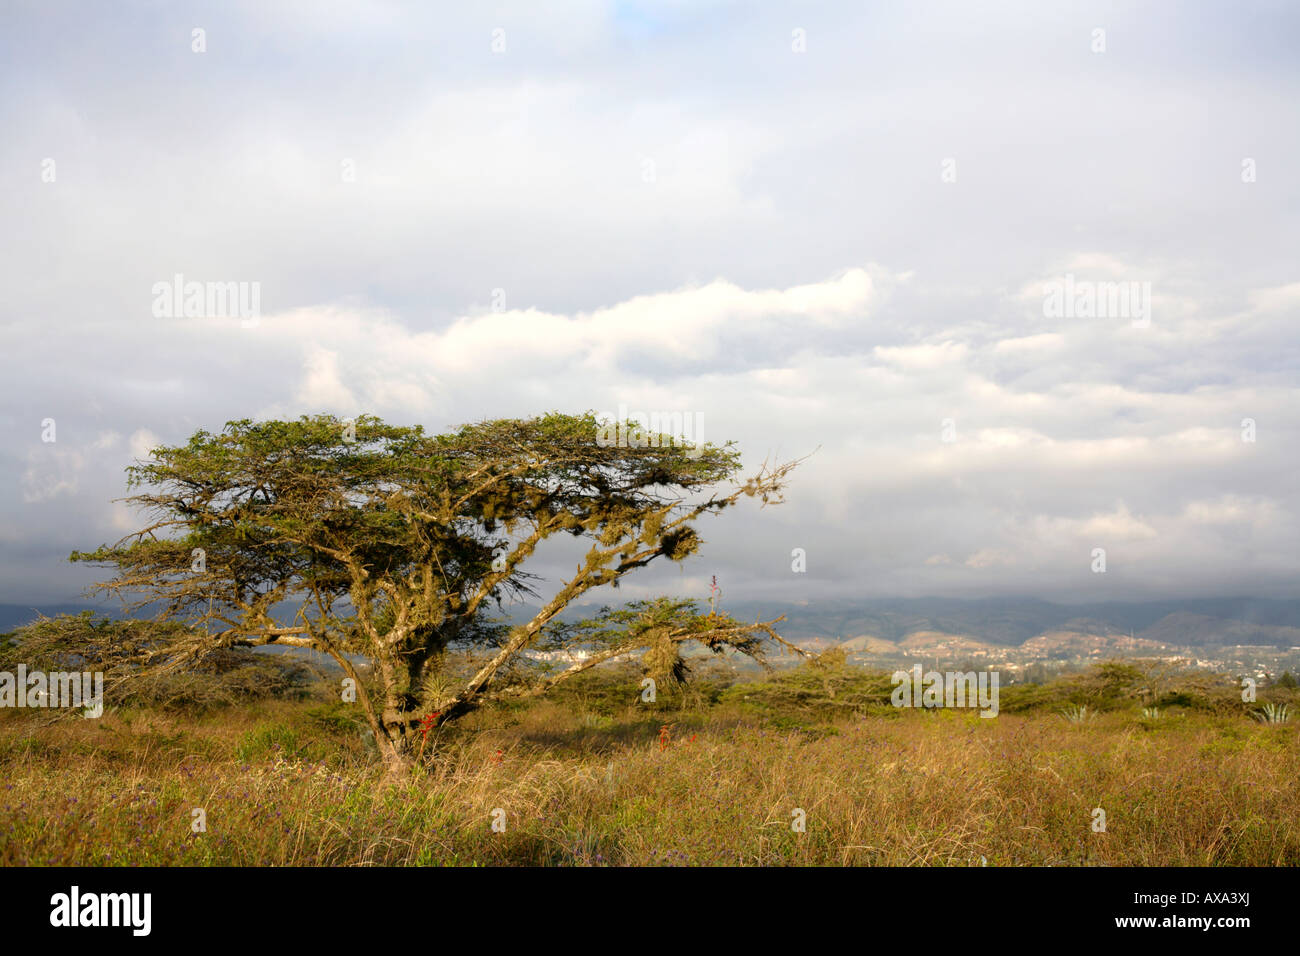 Lone Acacia macracantha tree in grassland with red bromeliad flower spikes Stock Photo